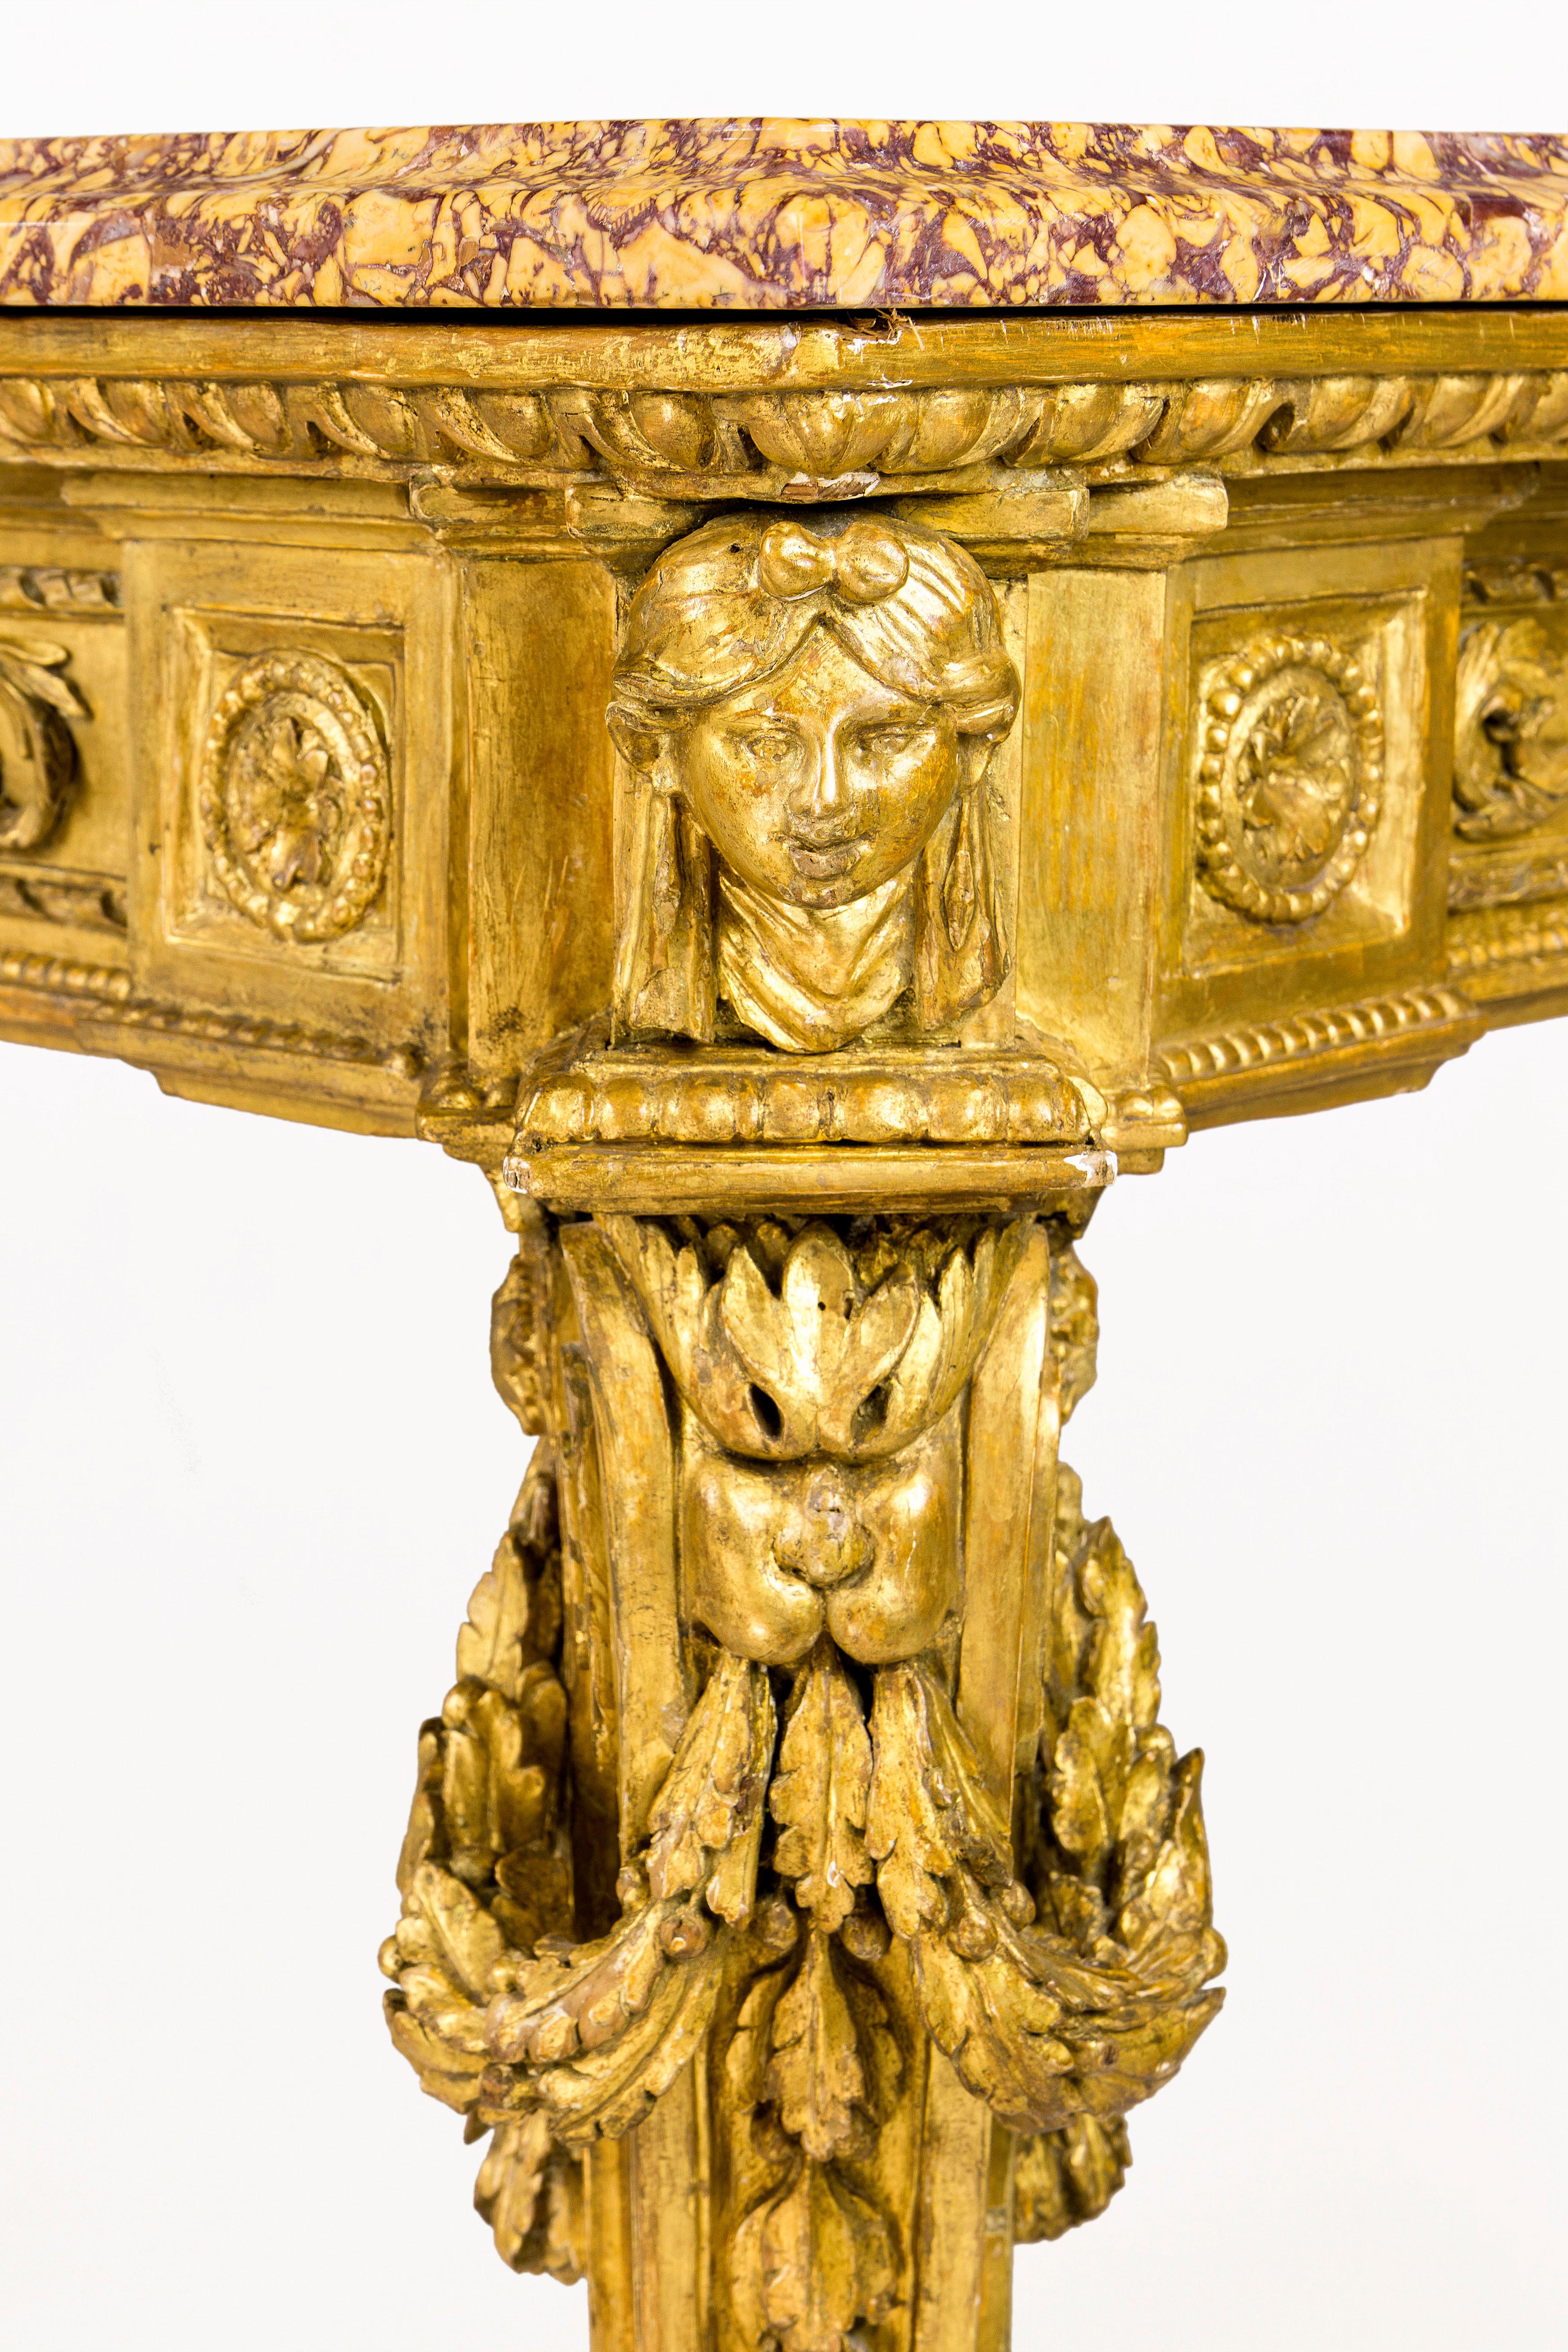 Gilt wooden console with marble top.
Spanish Brocatelle marble top.
Sculpted giltwood base.
Palacian console.
18th century, Italy.
Good vintage condition.
Original.